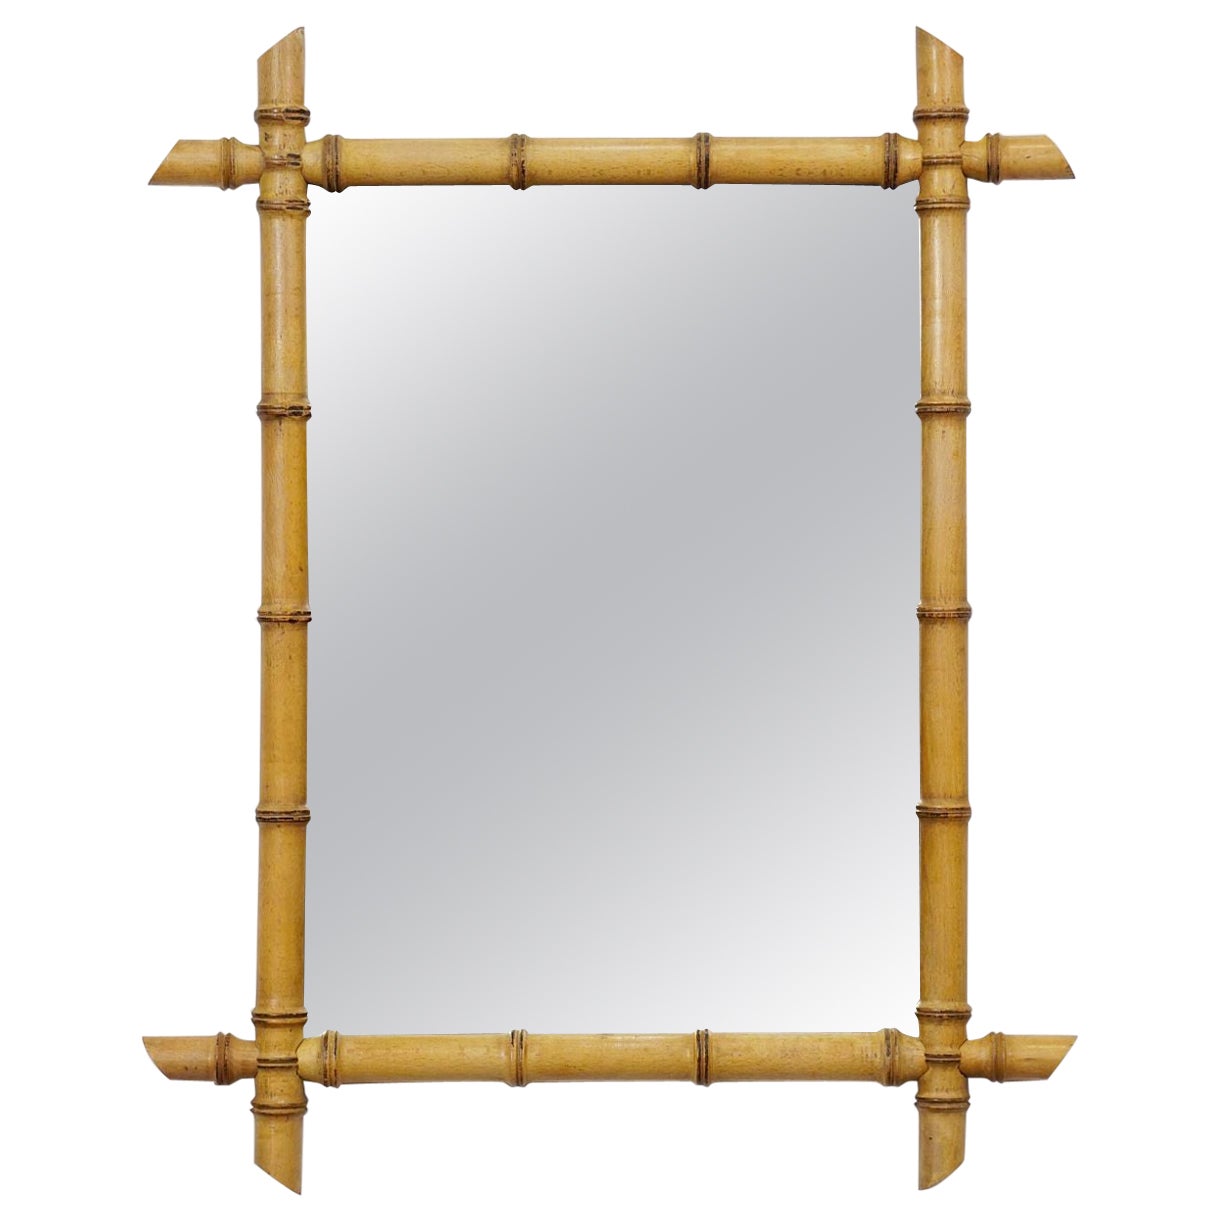 French Rectangular Mirror of Faux Bamboo (H 28 1/4 x W 22 1/4)